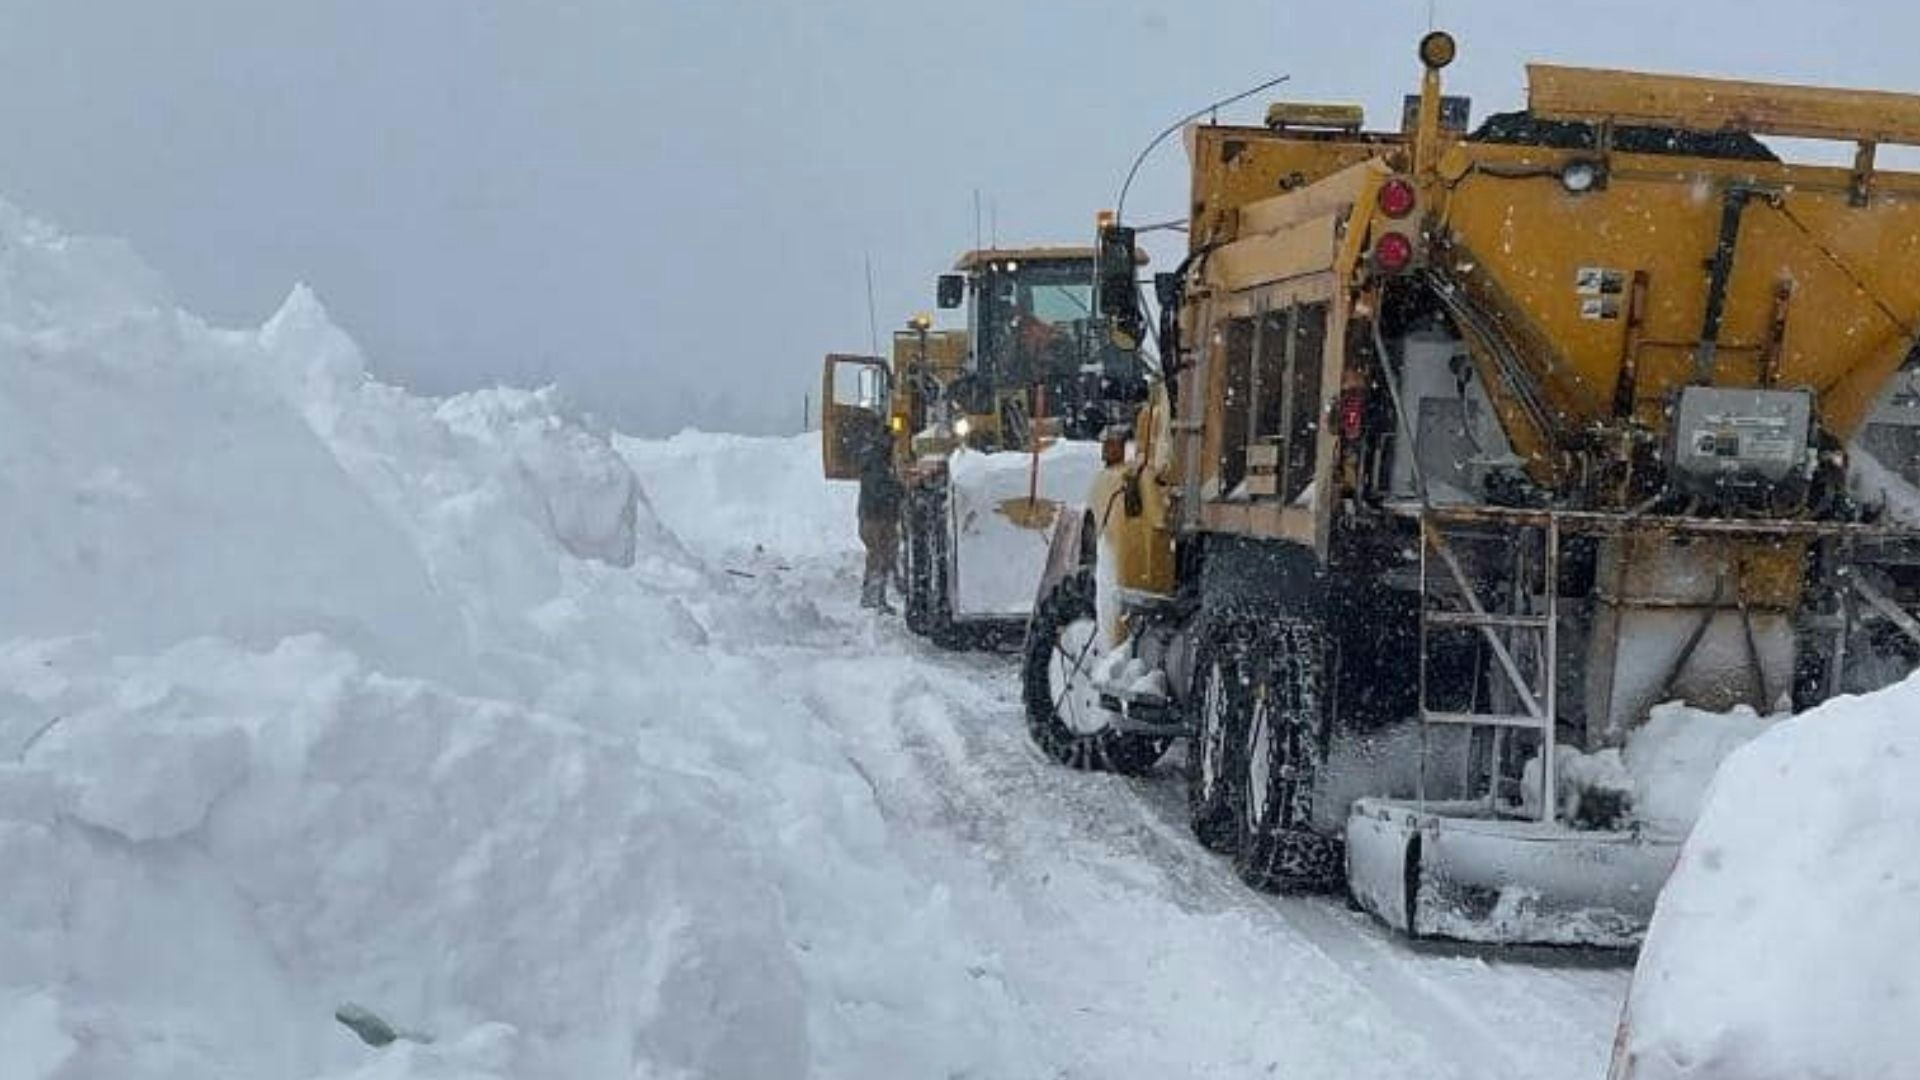 Wyoming Department of Transportation crews work to clear mountains of snow from South Pass this past winter.